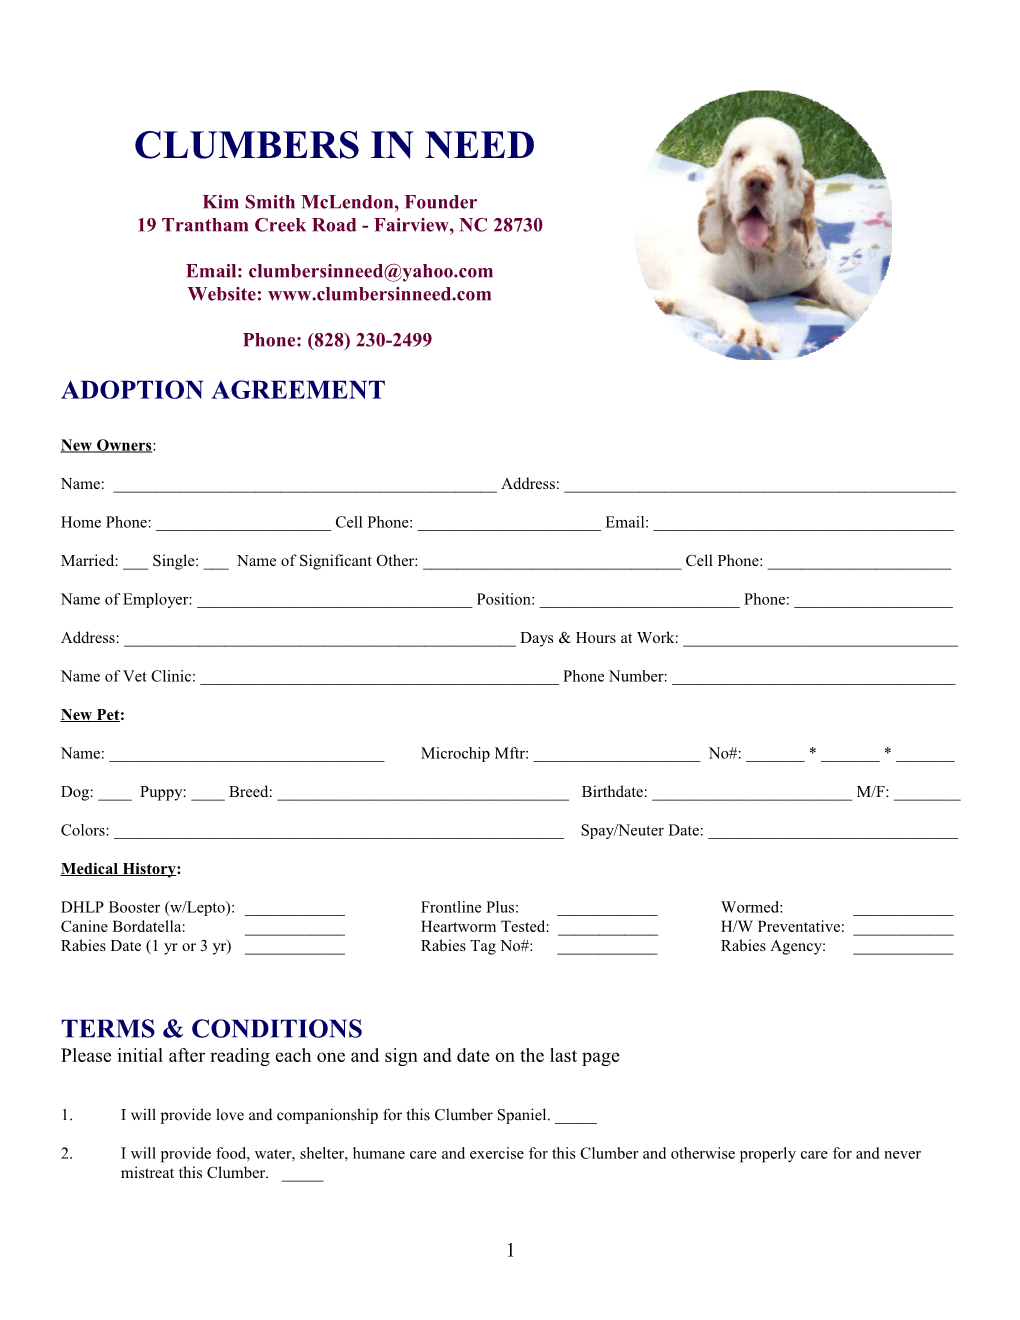 Placement Questionaire for New Adoptive Homes